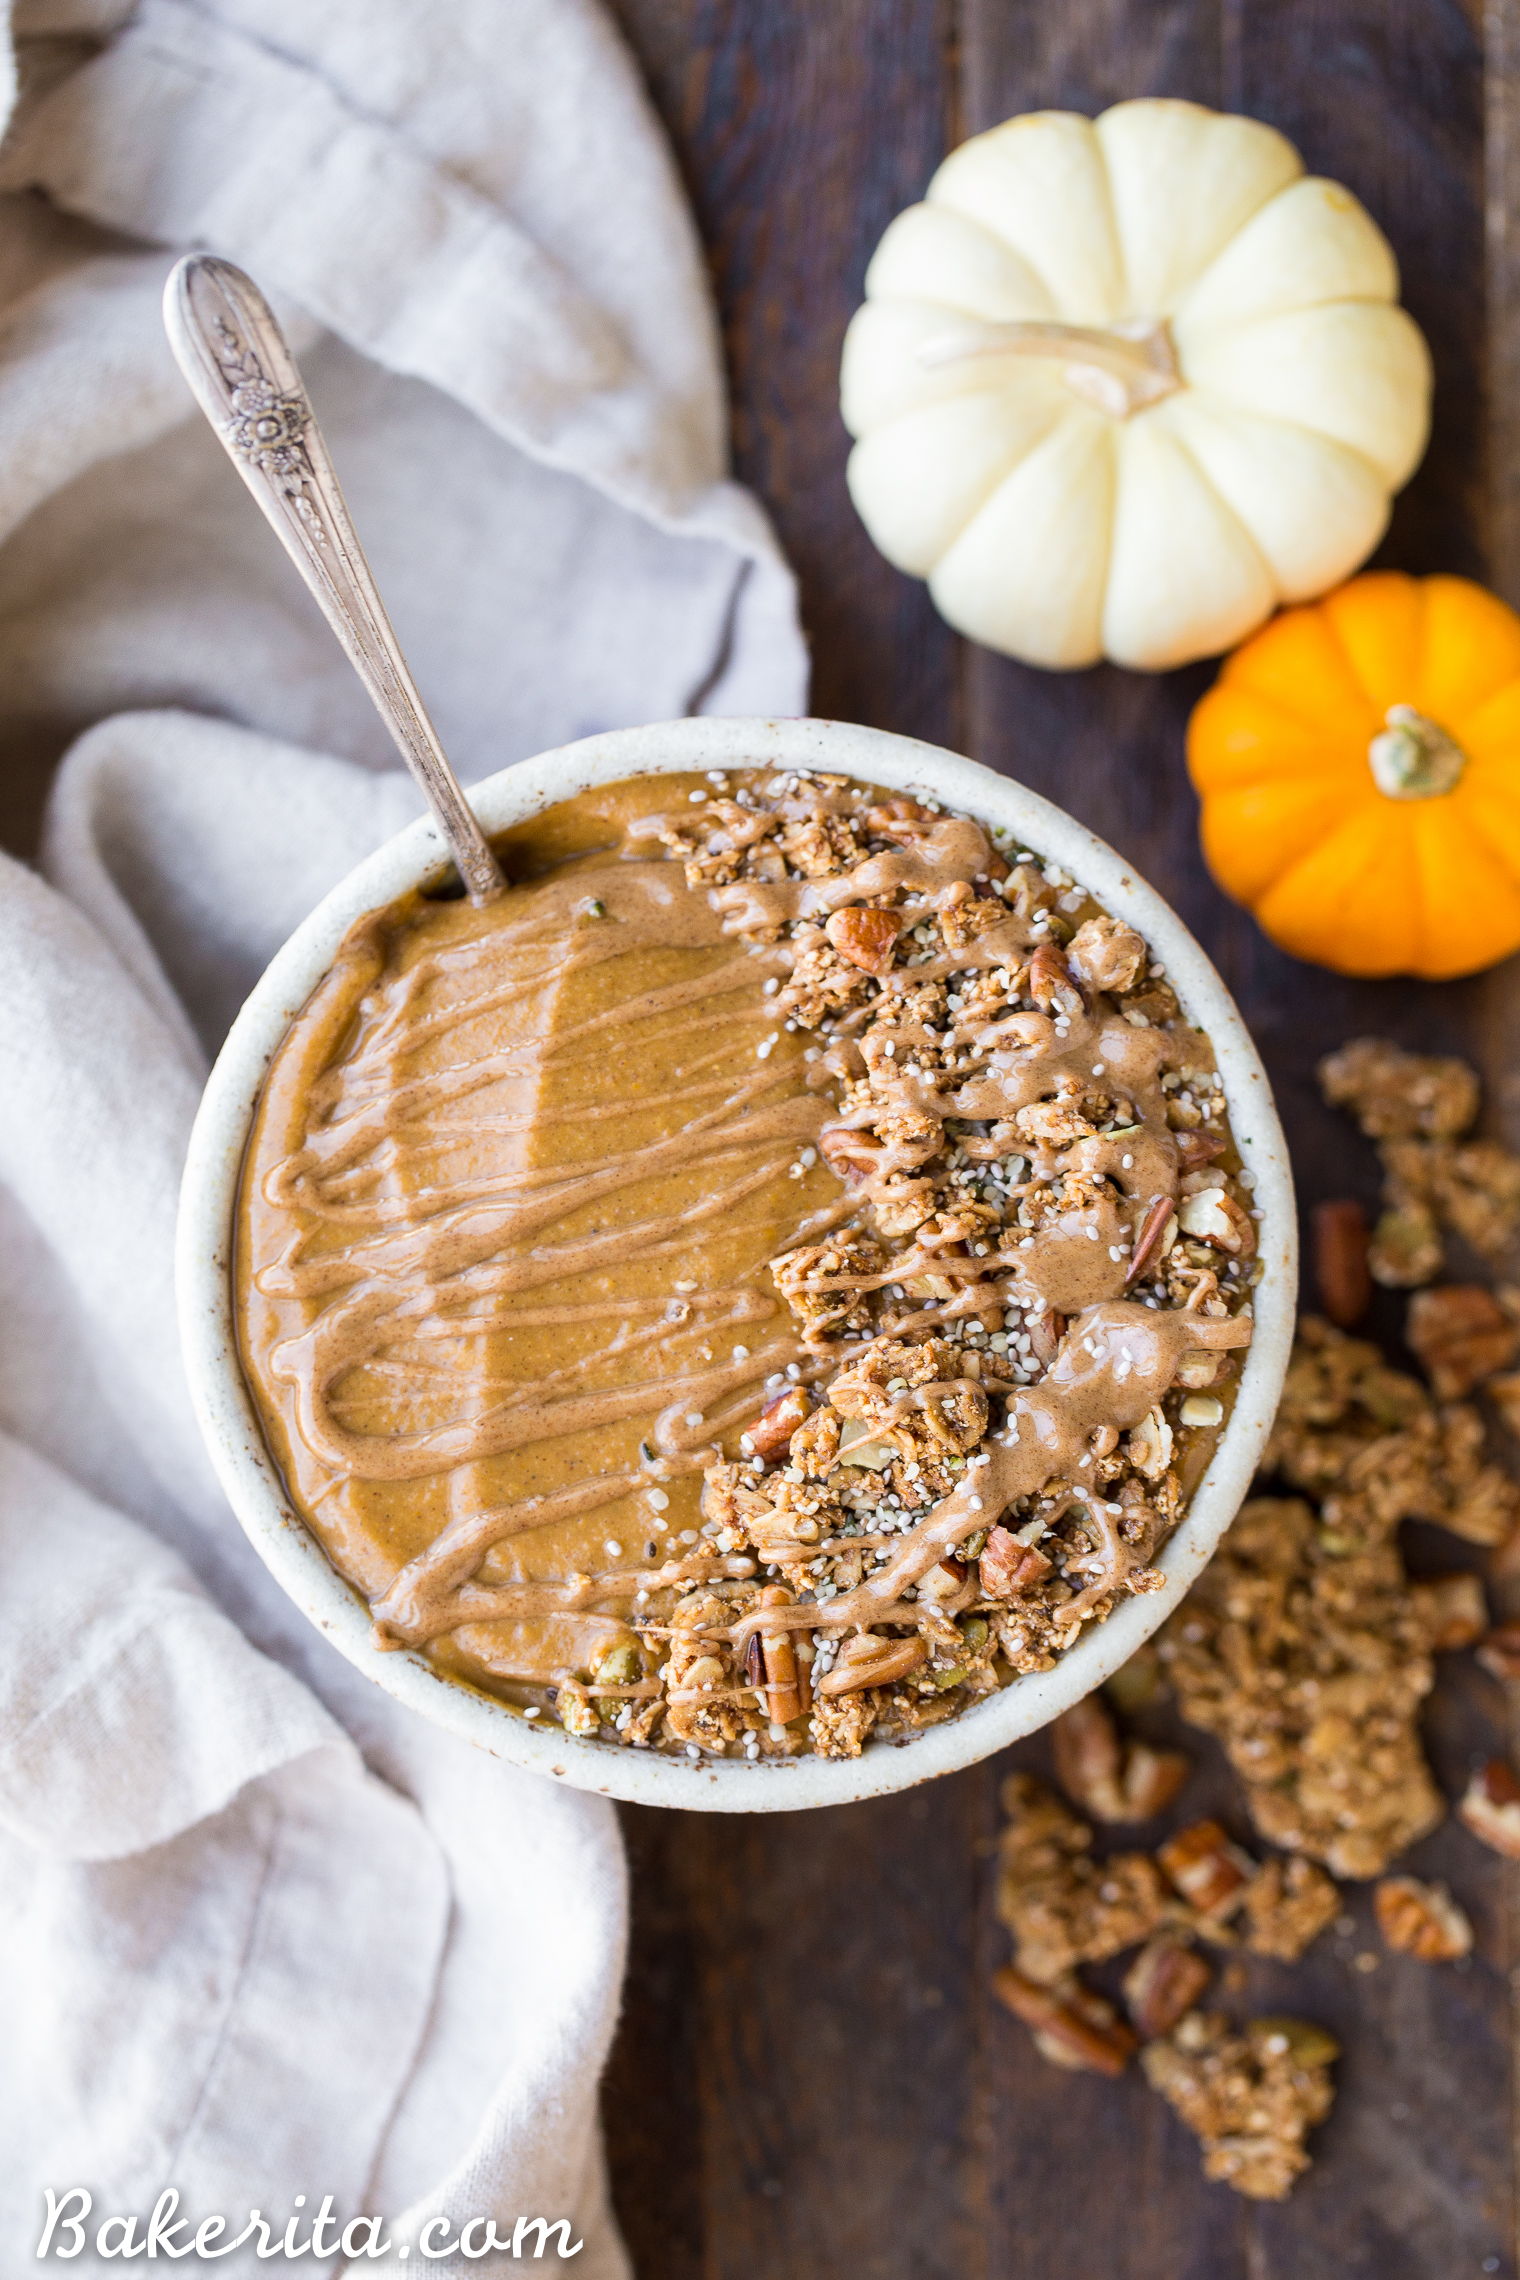 This Pumpkin Pie Smoothie Bowl tastes like a smoothie version of pumpkin pie filling! It's loaded with veggies for a filling, nutrient-dense breakfast that's bursting with fall flavors and spices. It's gluten-free, paleo, vegan and Whole30.